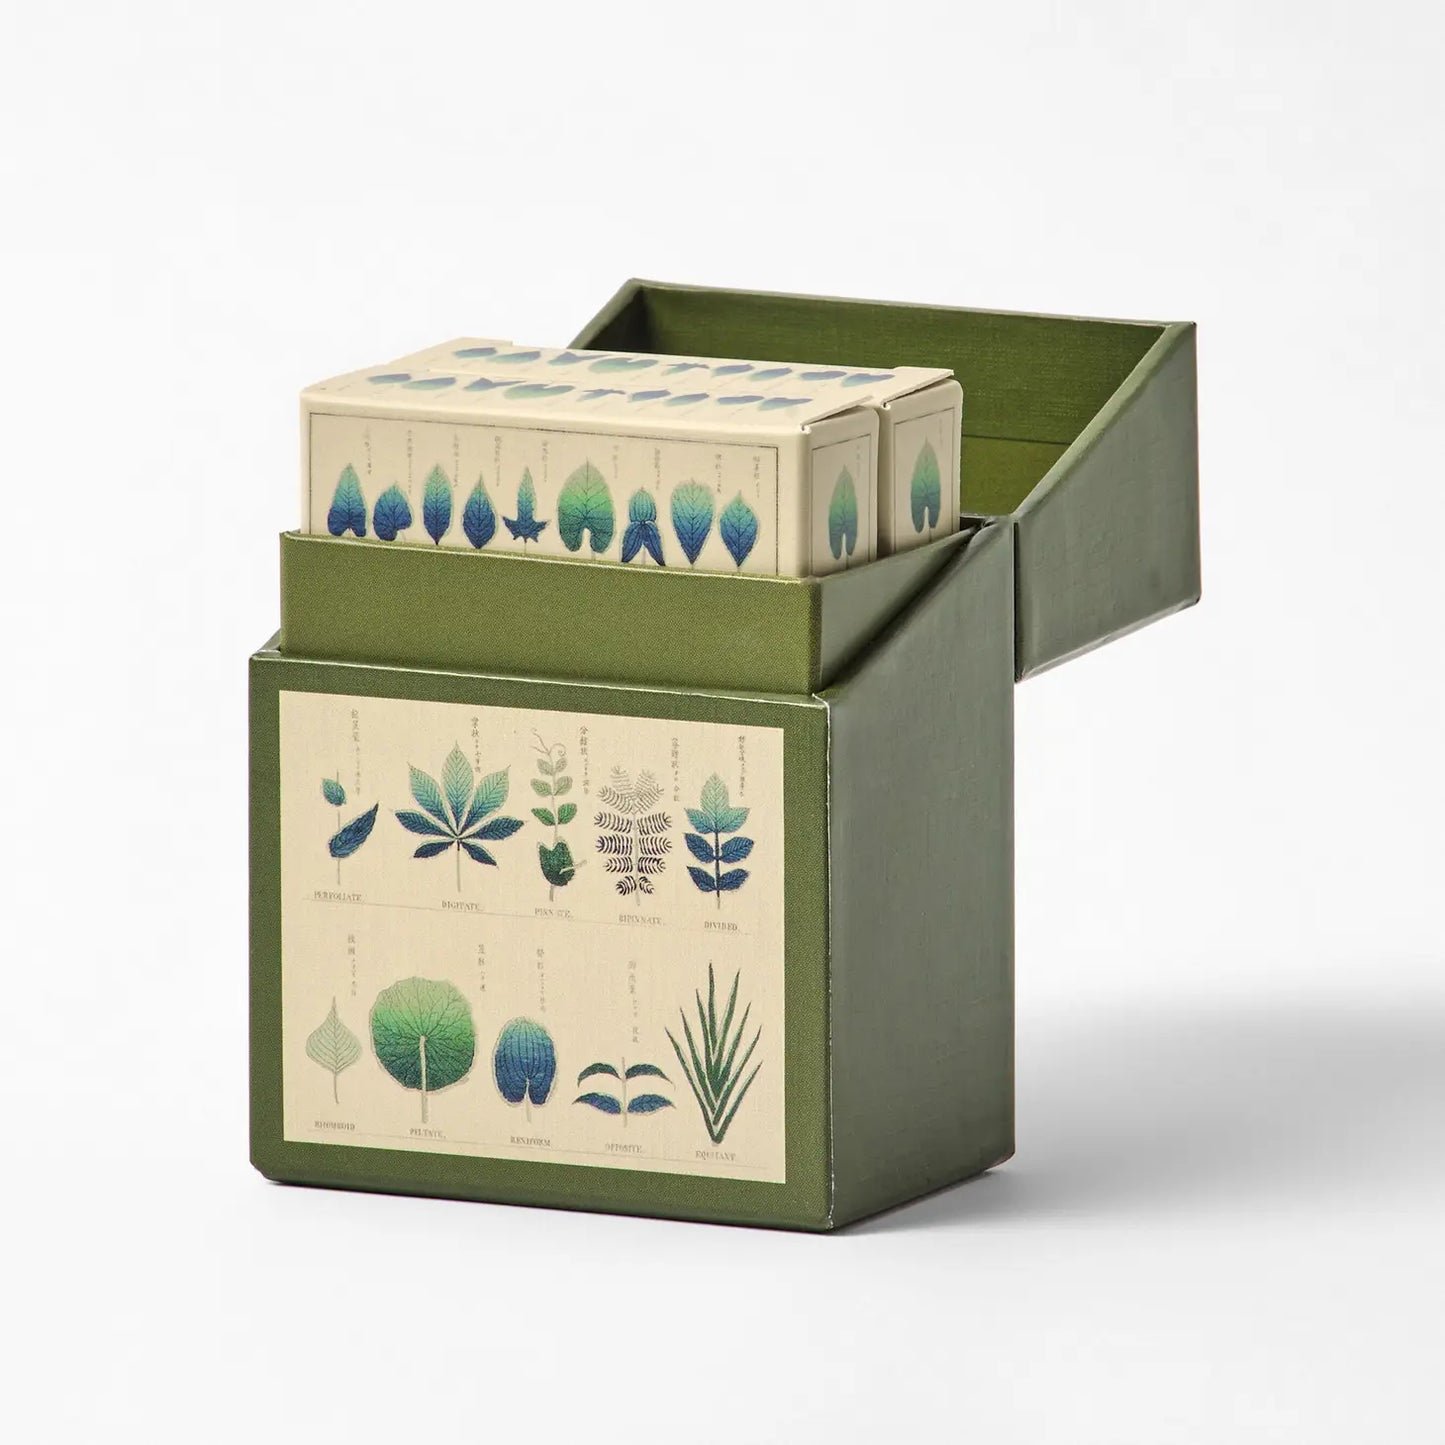 Shapes of leaves playing card set